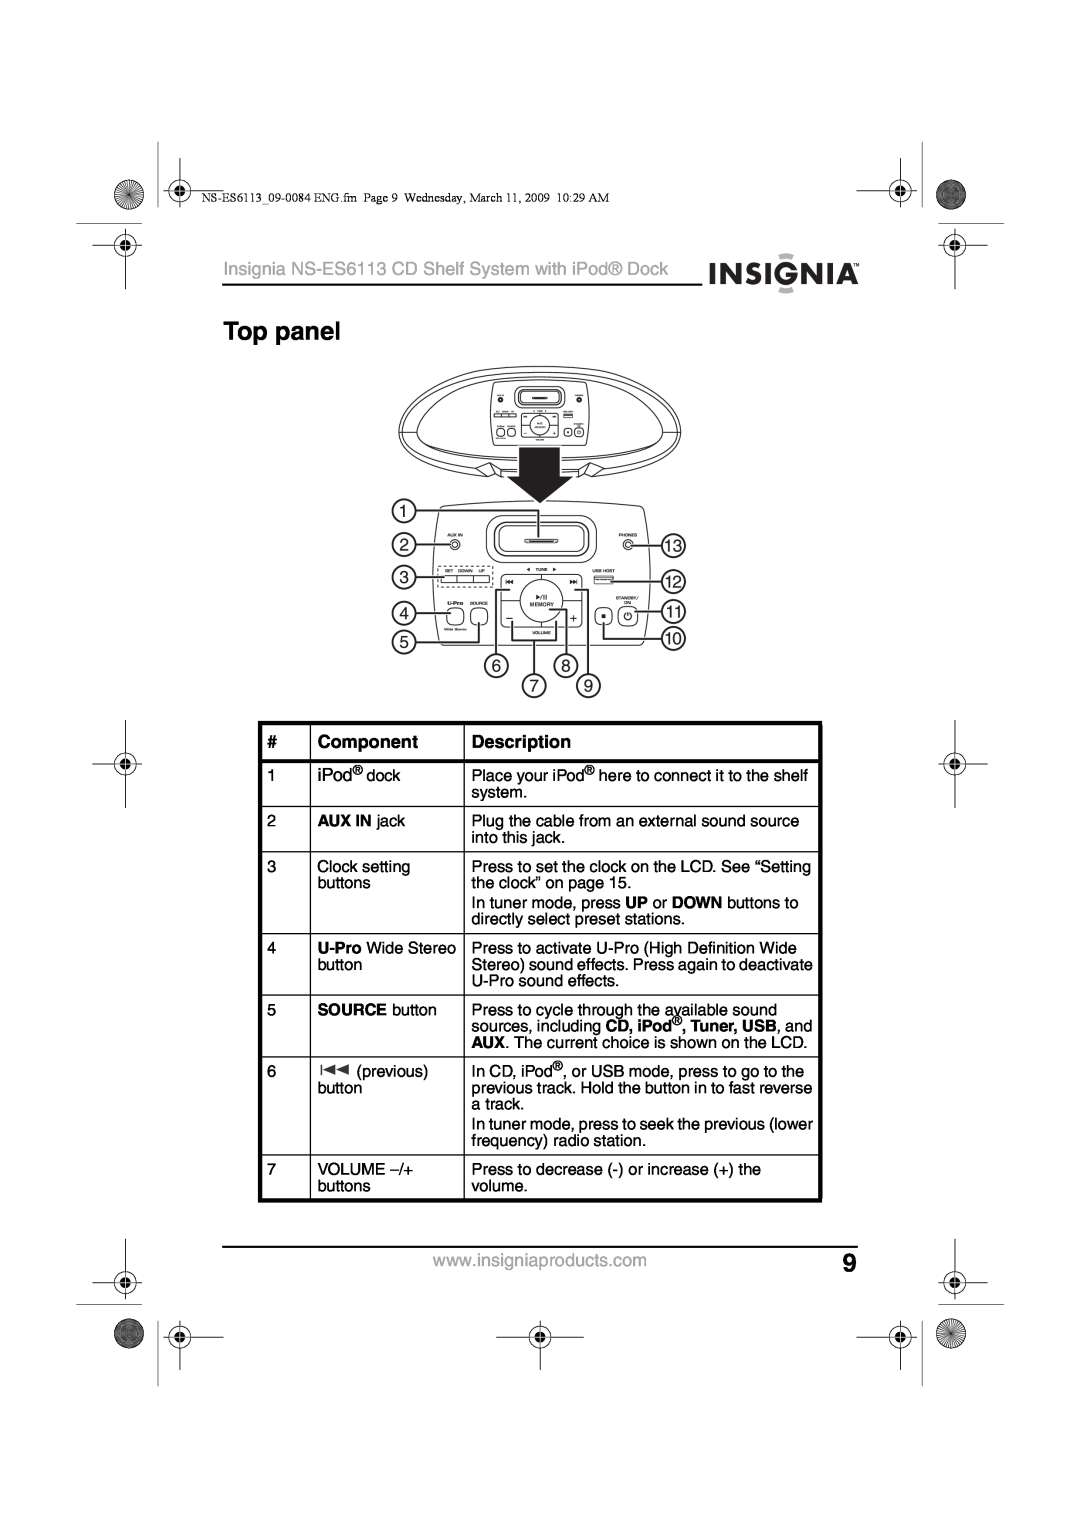 Insignia manual Top panel, Insignia NS-ES6113CD Shelf System with iPod Dock, Component, Description, AUX IN jack 